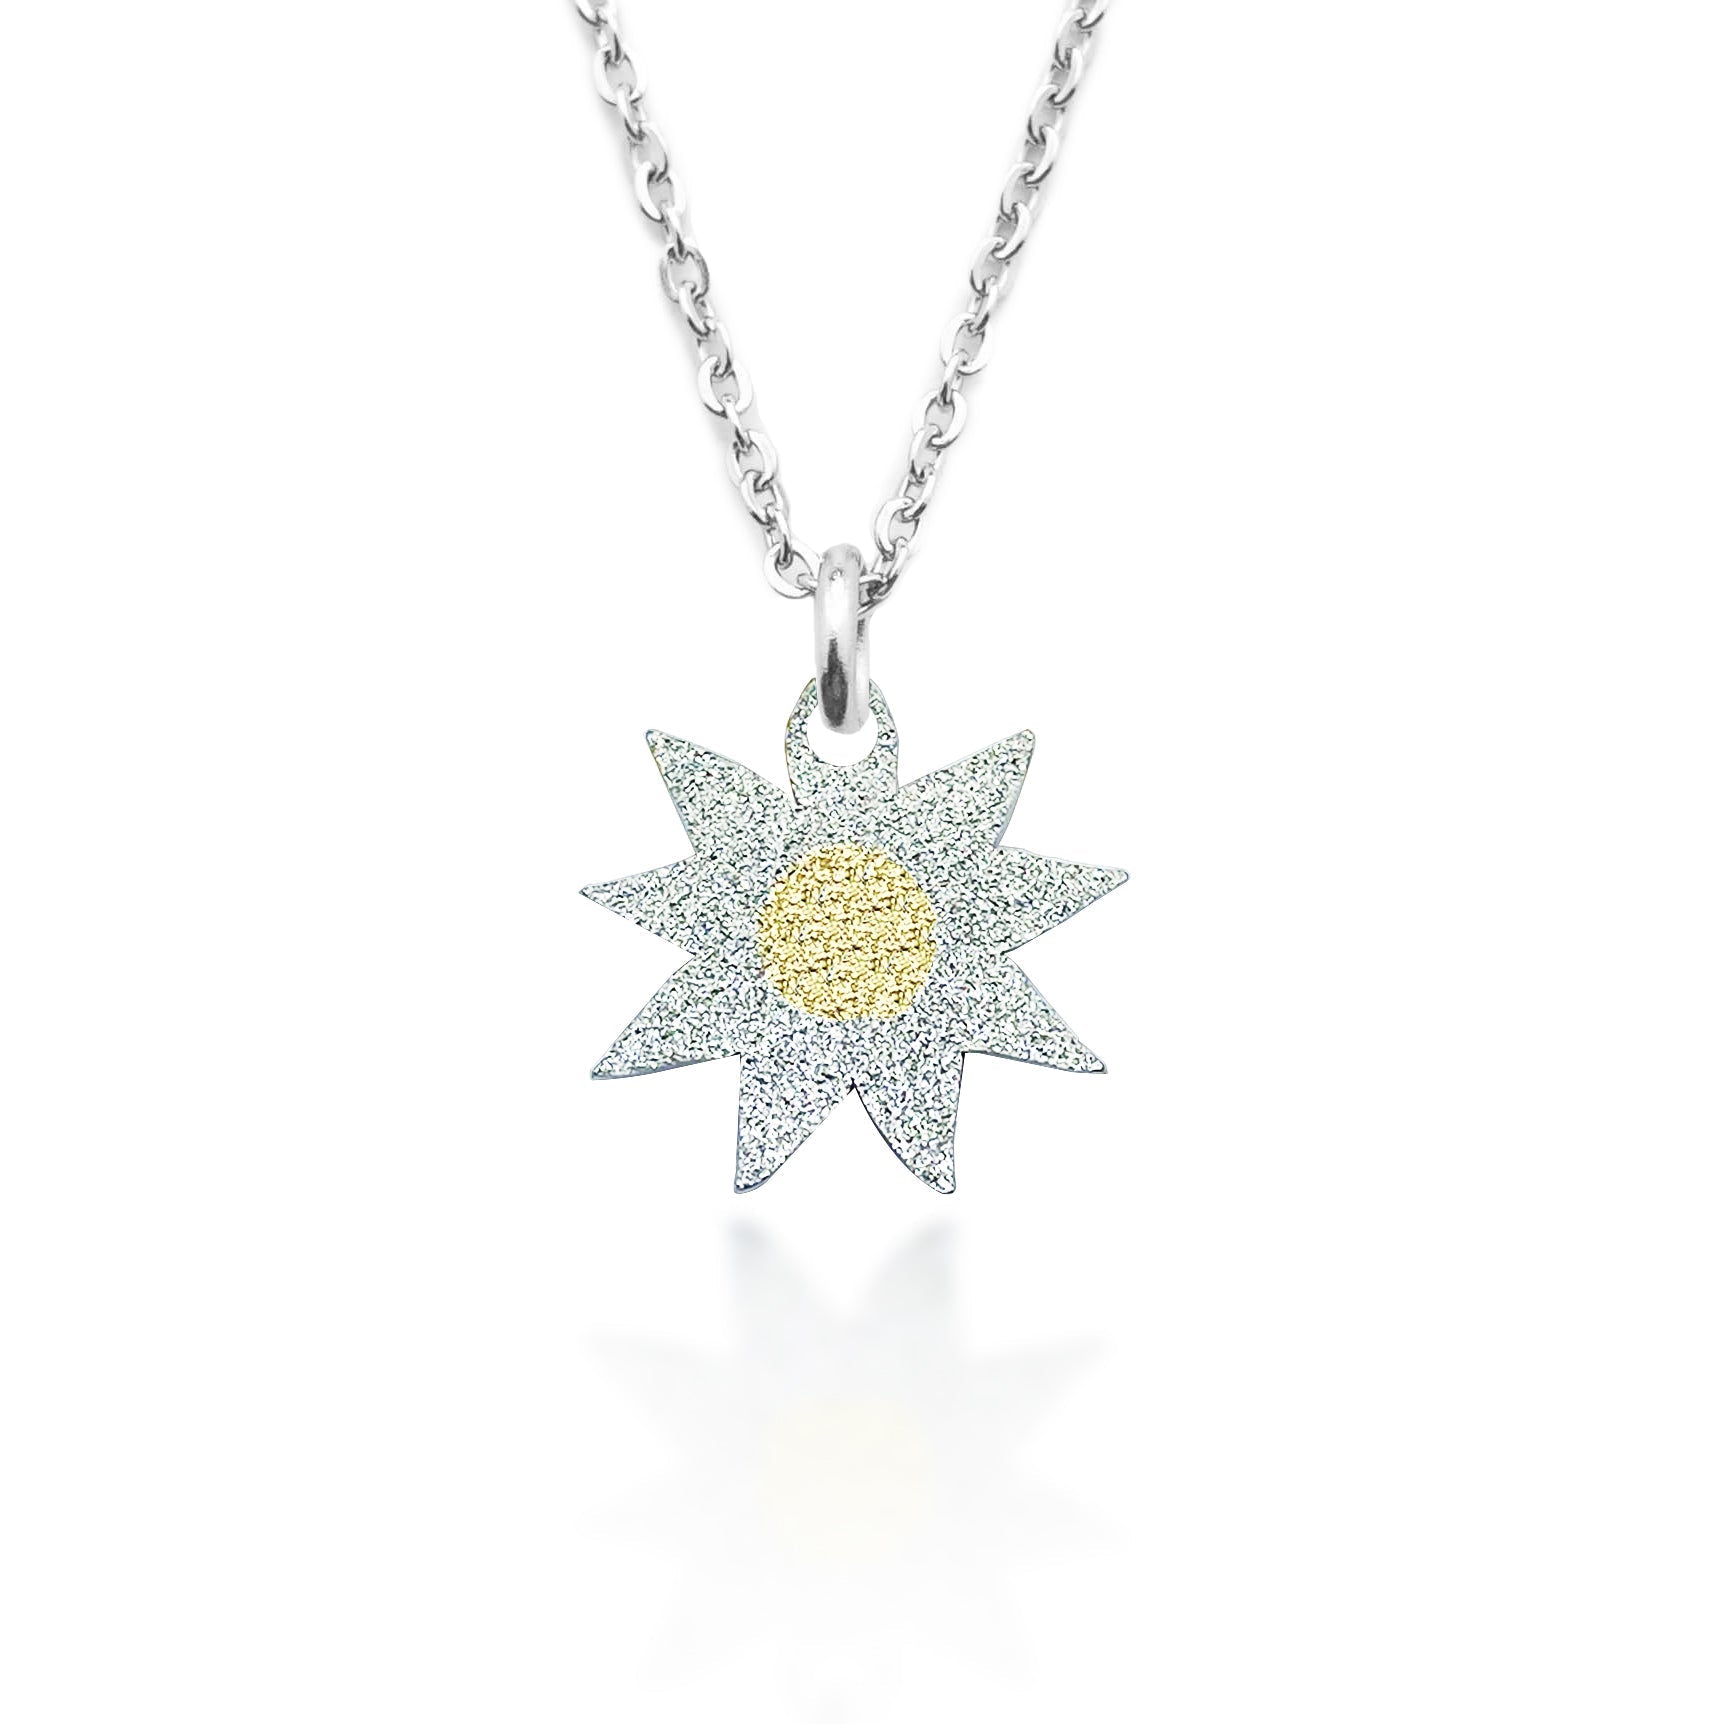 Beginnings Necklace | by Arti - ARTI by Belle Fever